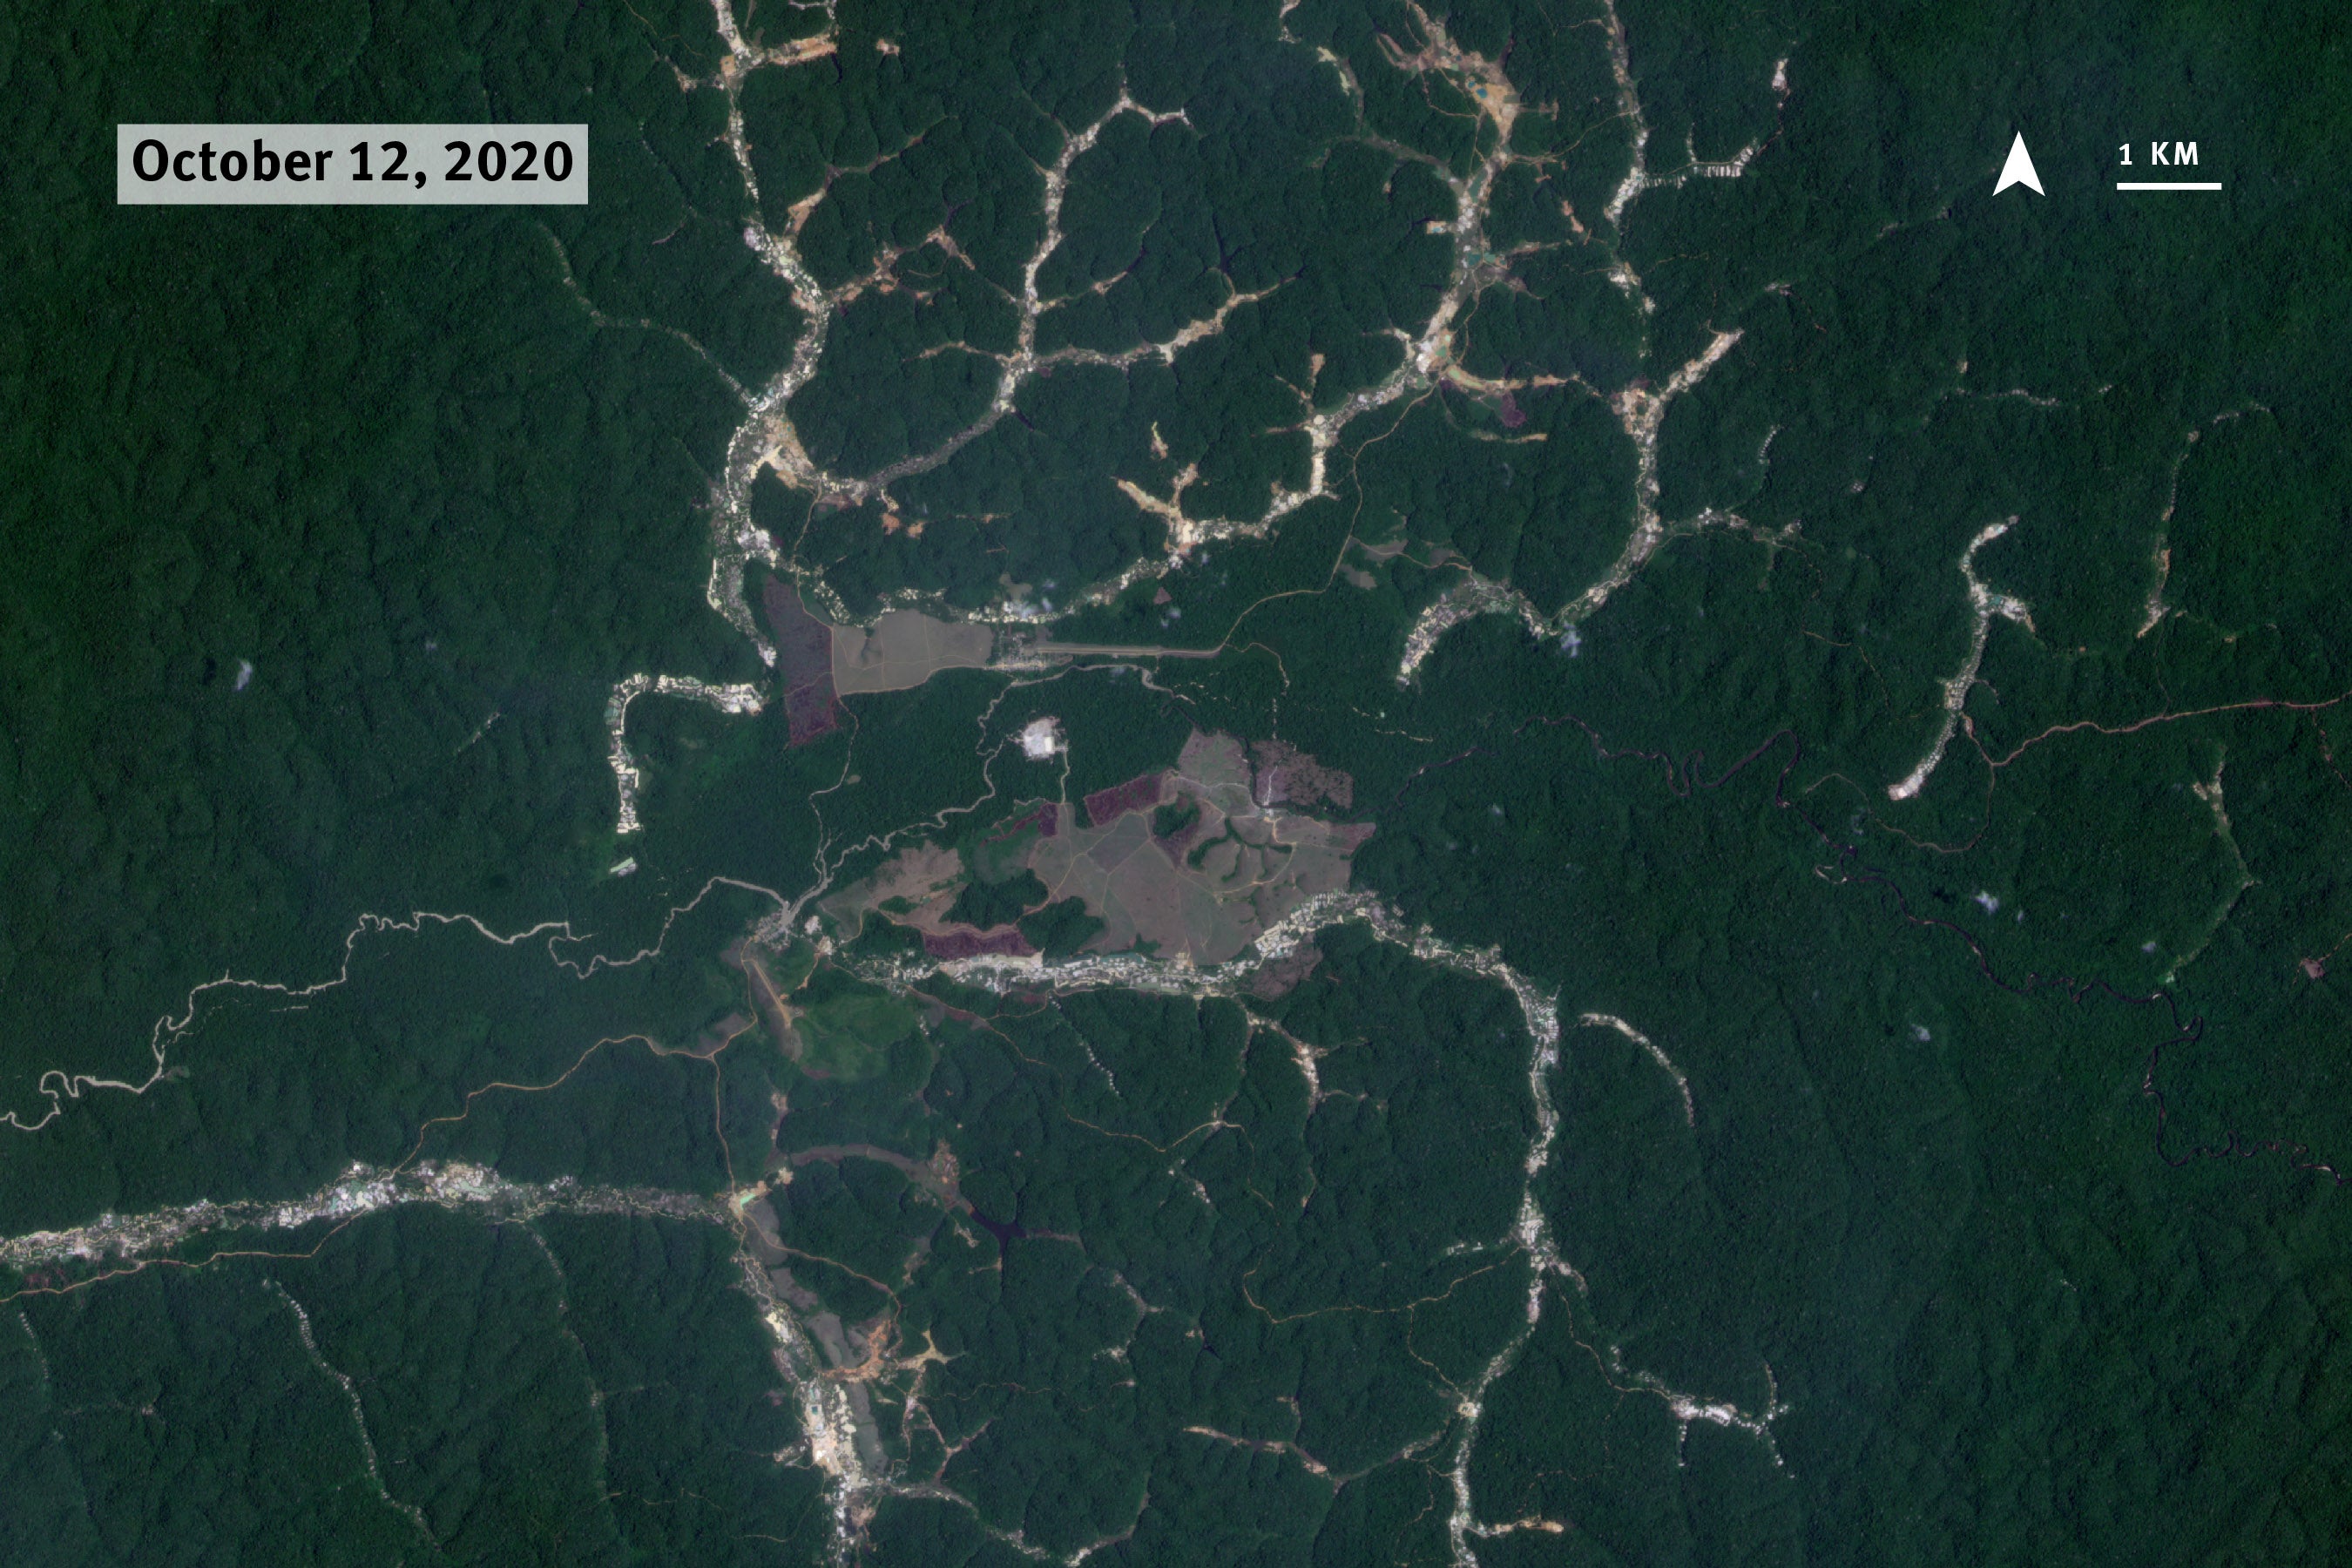 A satellite image of mining sites in the Amazon